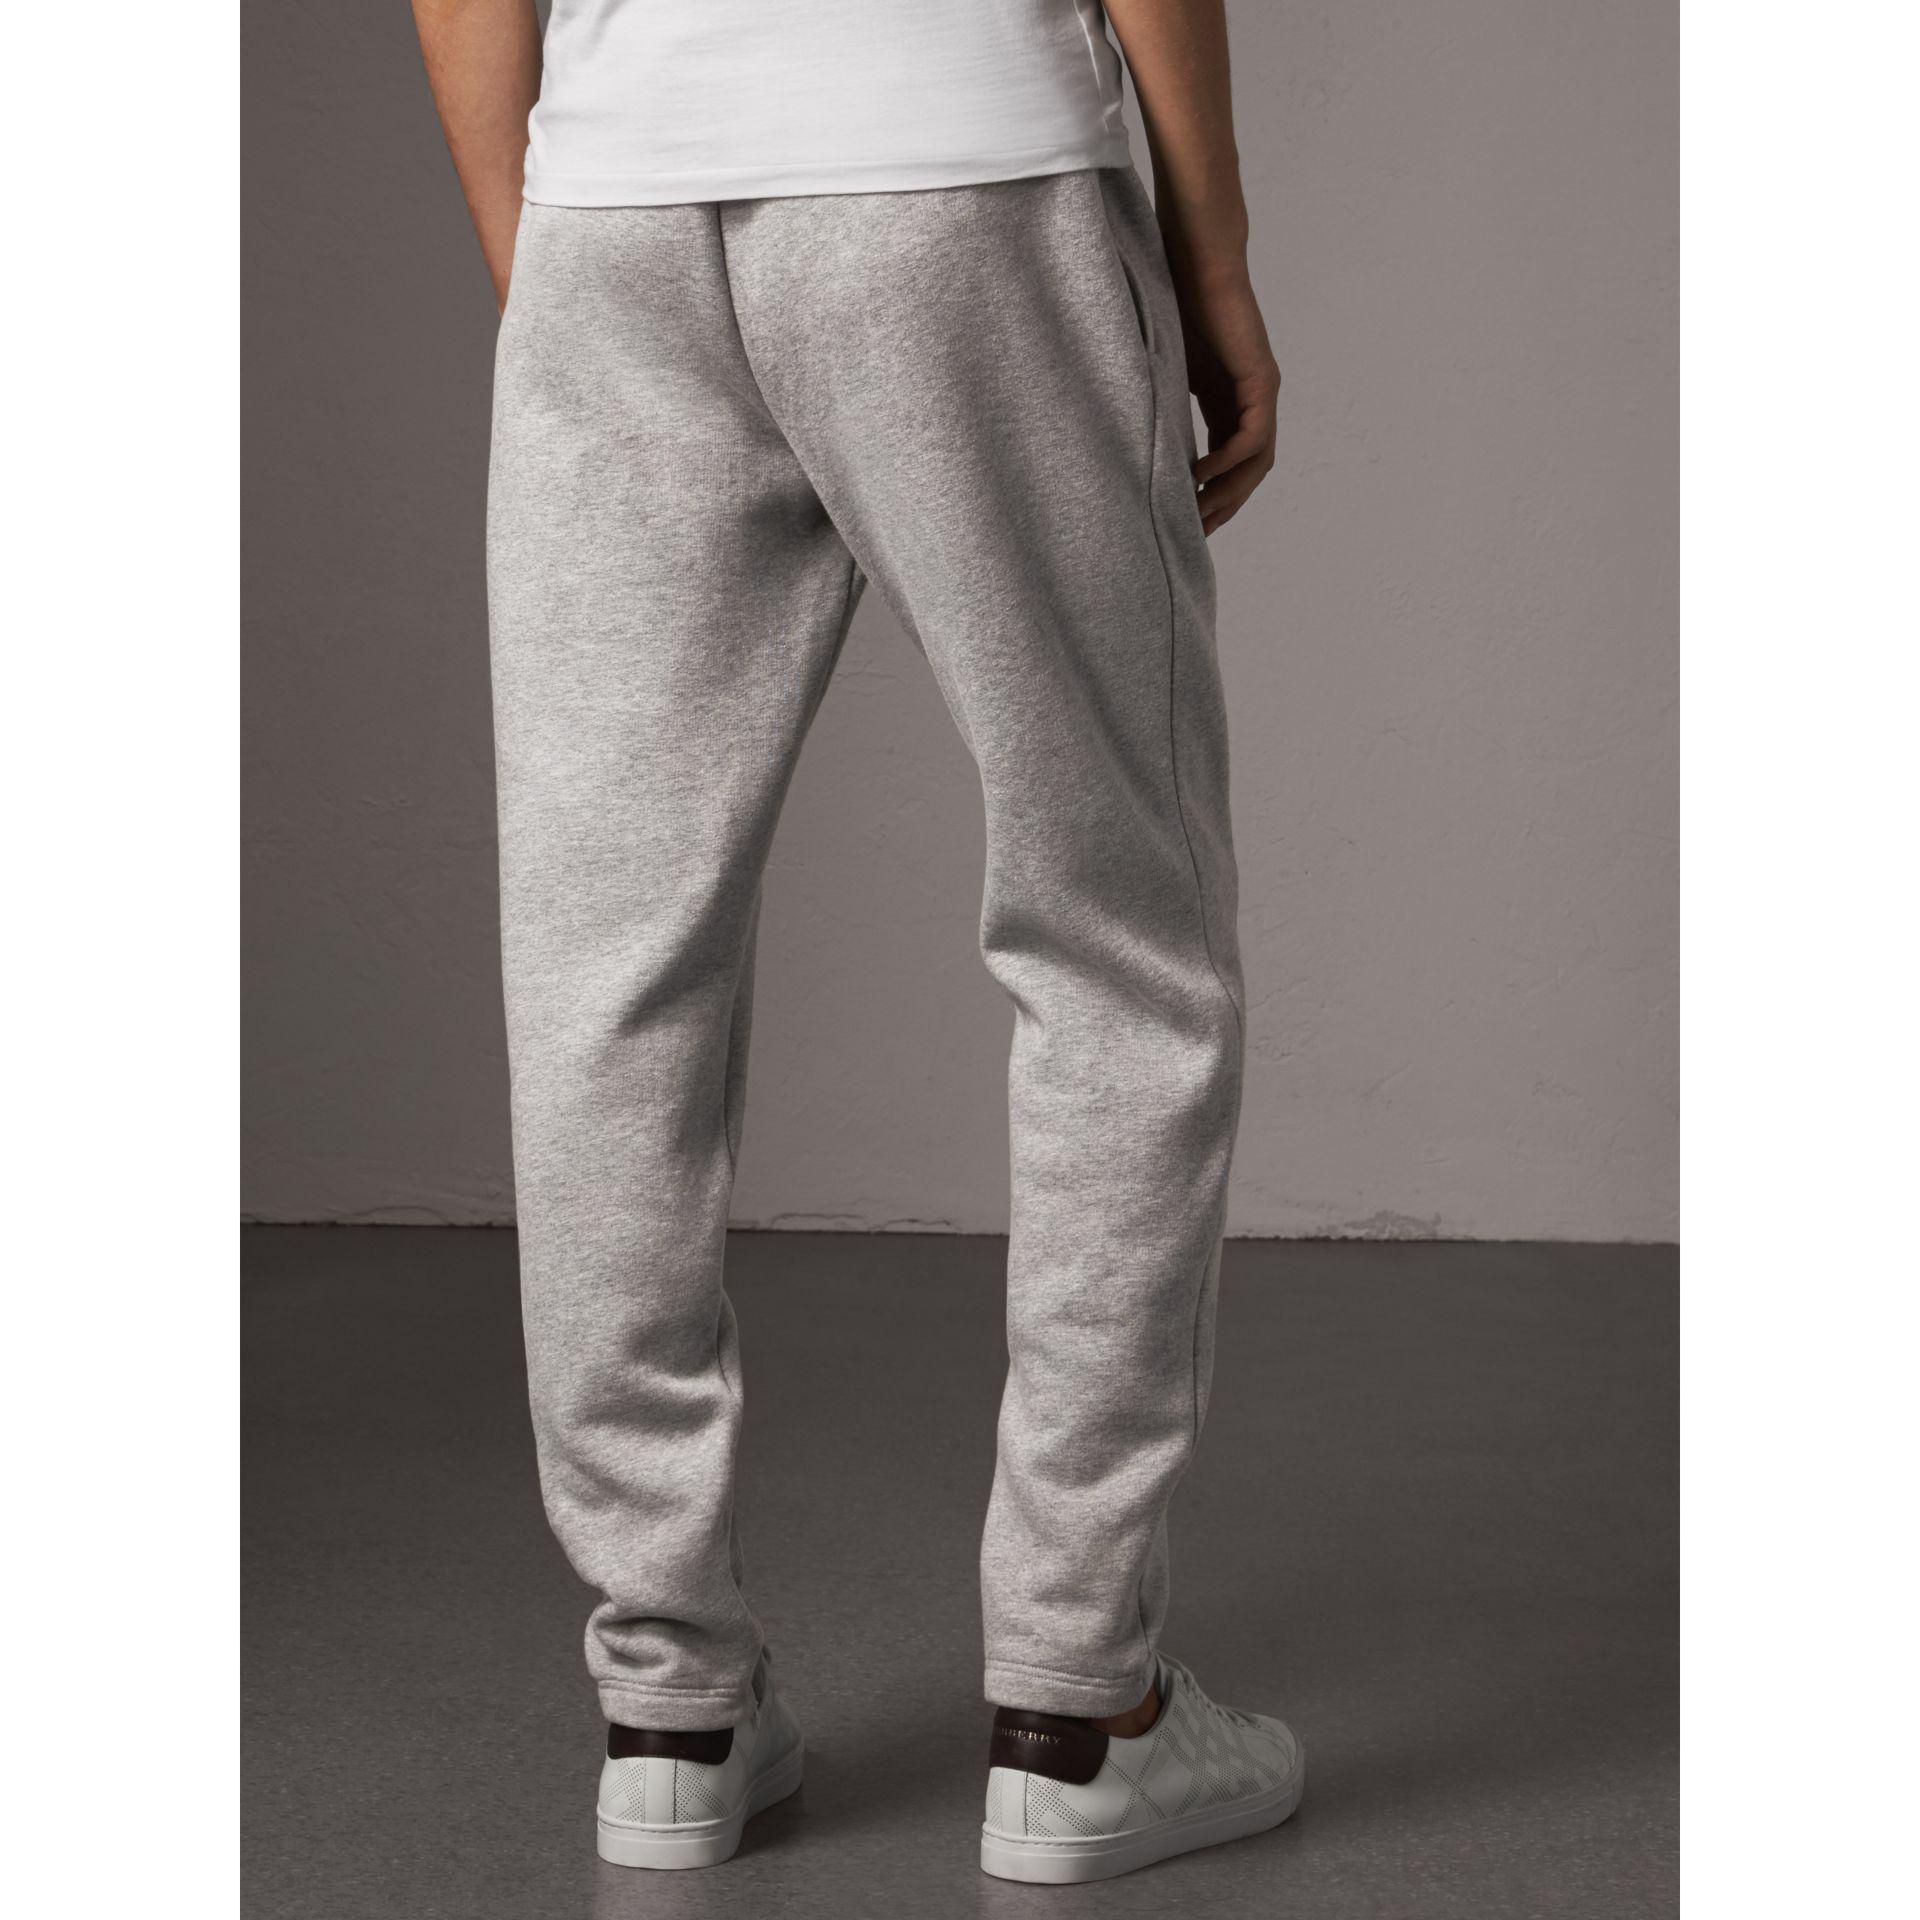 Burberry Embroidered Jersey Sweatpants in Gray for Men - Lyst